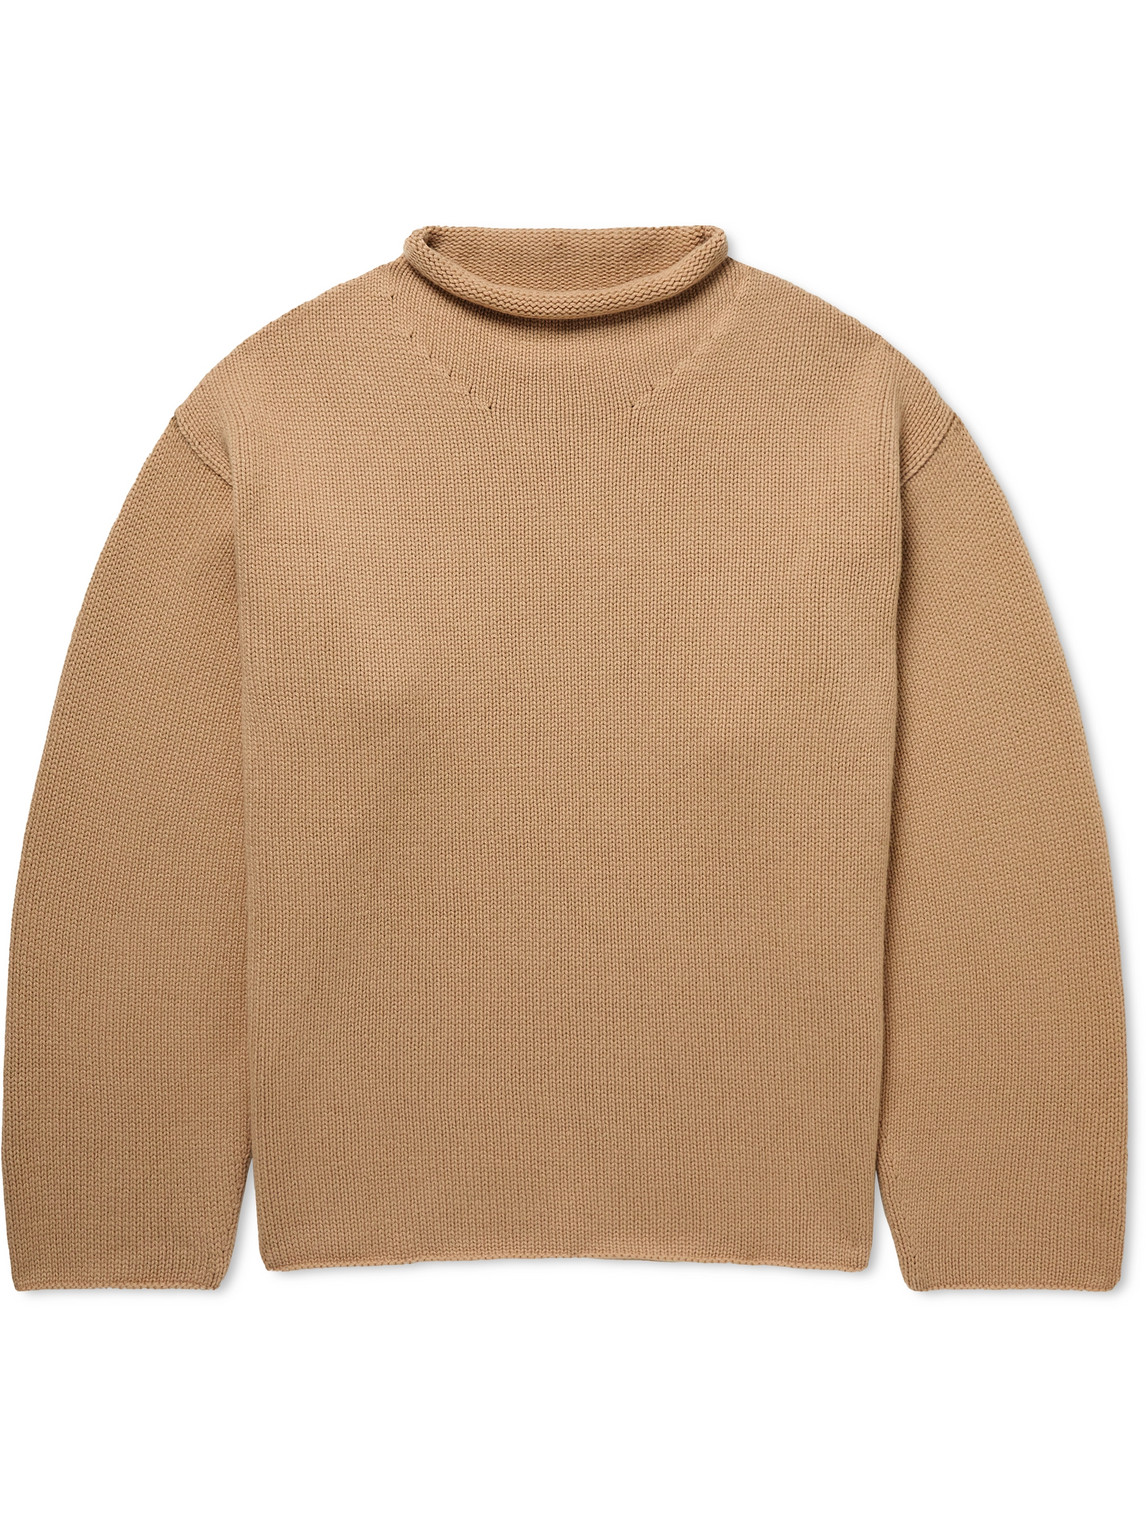 Oversized Ribbed Cashmere Rollneck Sweater